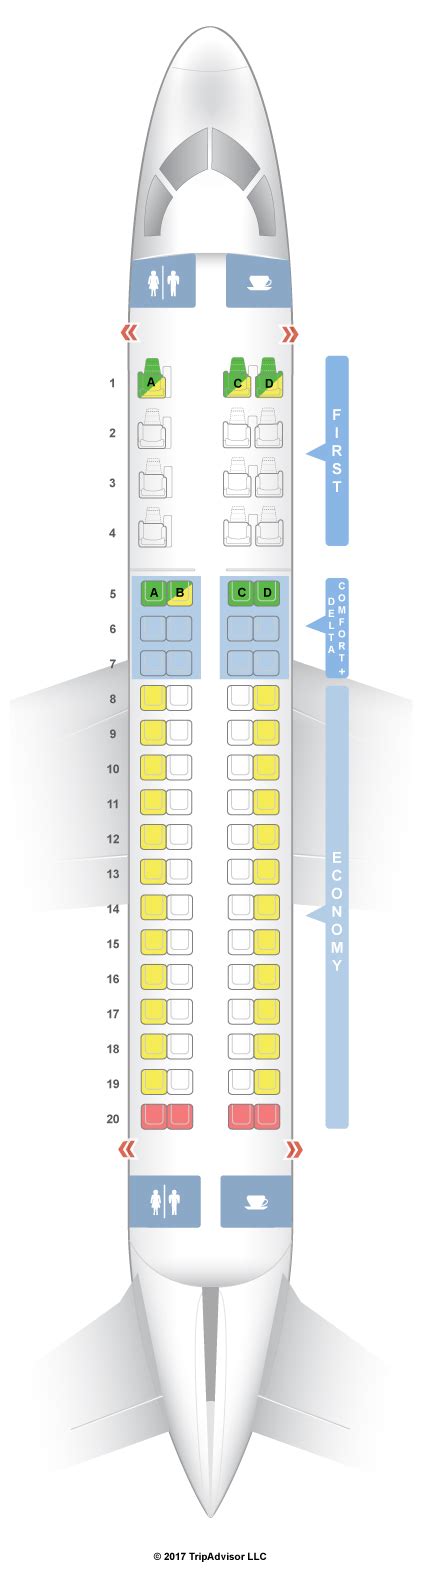 Embraer E-175 (E75) Layout 2 - SkyWest; McDonnell Douglas MD-88 (M88) McDonnell Douglas MD-90 (M90) ... As SeatGuru says, the window is misaligned forward, so you have to lean ahead a bit if you want to fully enjoy the view. ... Standard Delta Comfort+ (Rows 5-9) Standard Economy (Rows 10-20) Viewing. Bombardier CRJ-900 Atmosphere Cabin (CR9) .... 